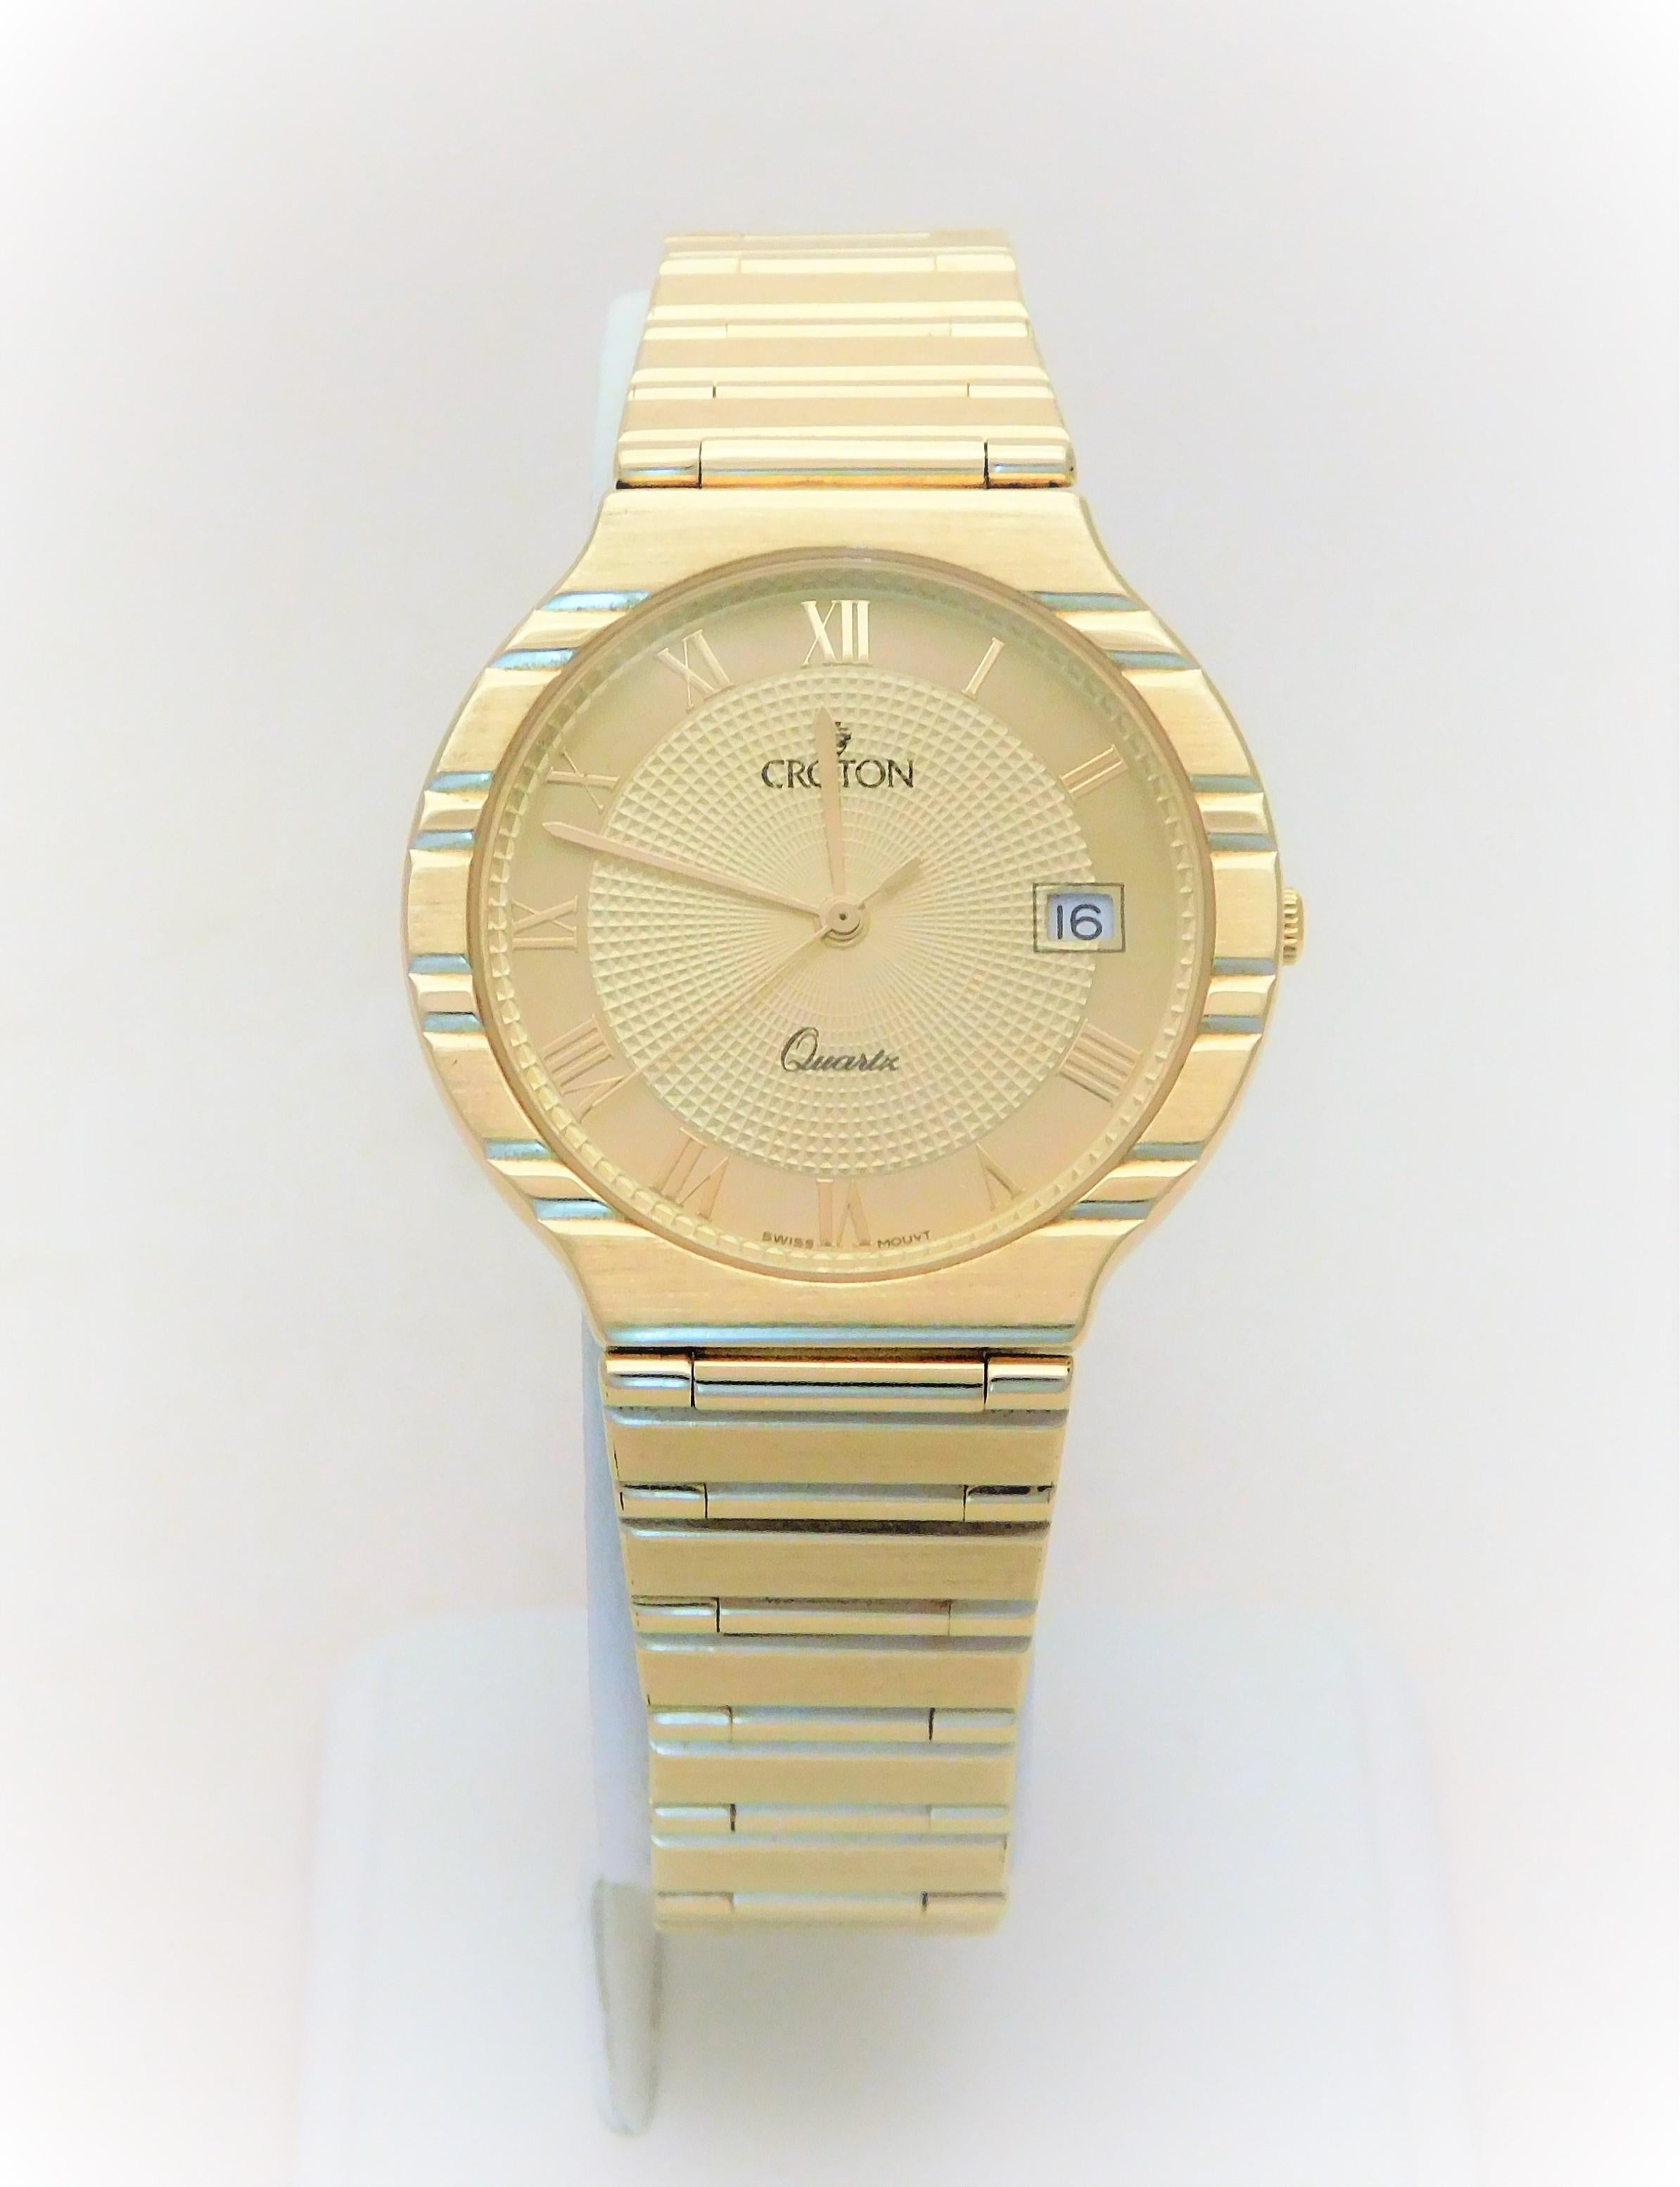 
Crafted in Italy, Circa mid Century, this amazing Croton timepiece has been masterfully forged in solid 14k yellow gold.  Its chic look features both a brushed and polished finish.  Although originally made for a man, with todays ladies’ fashion